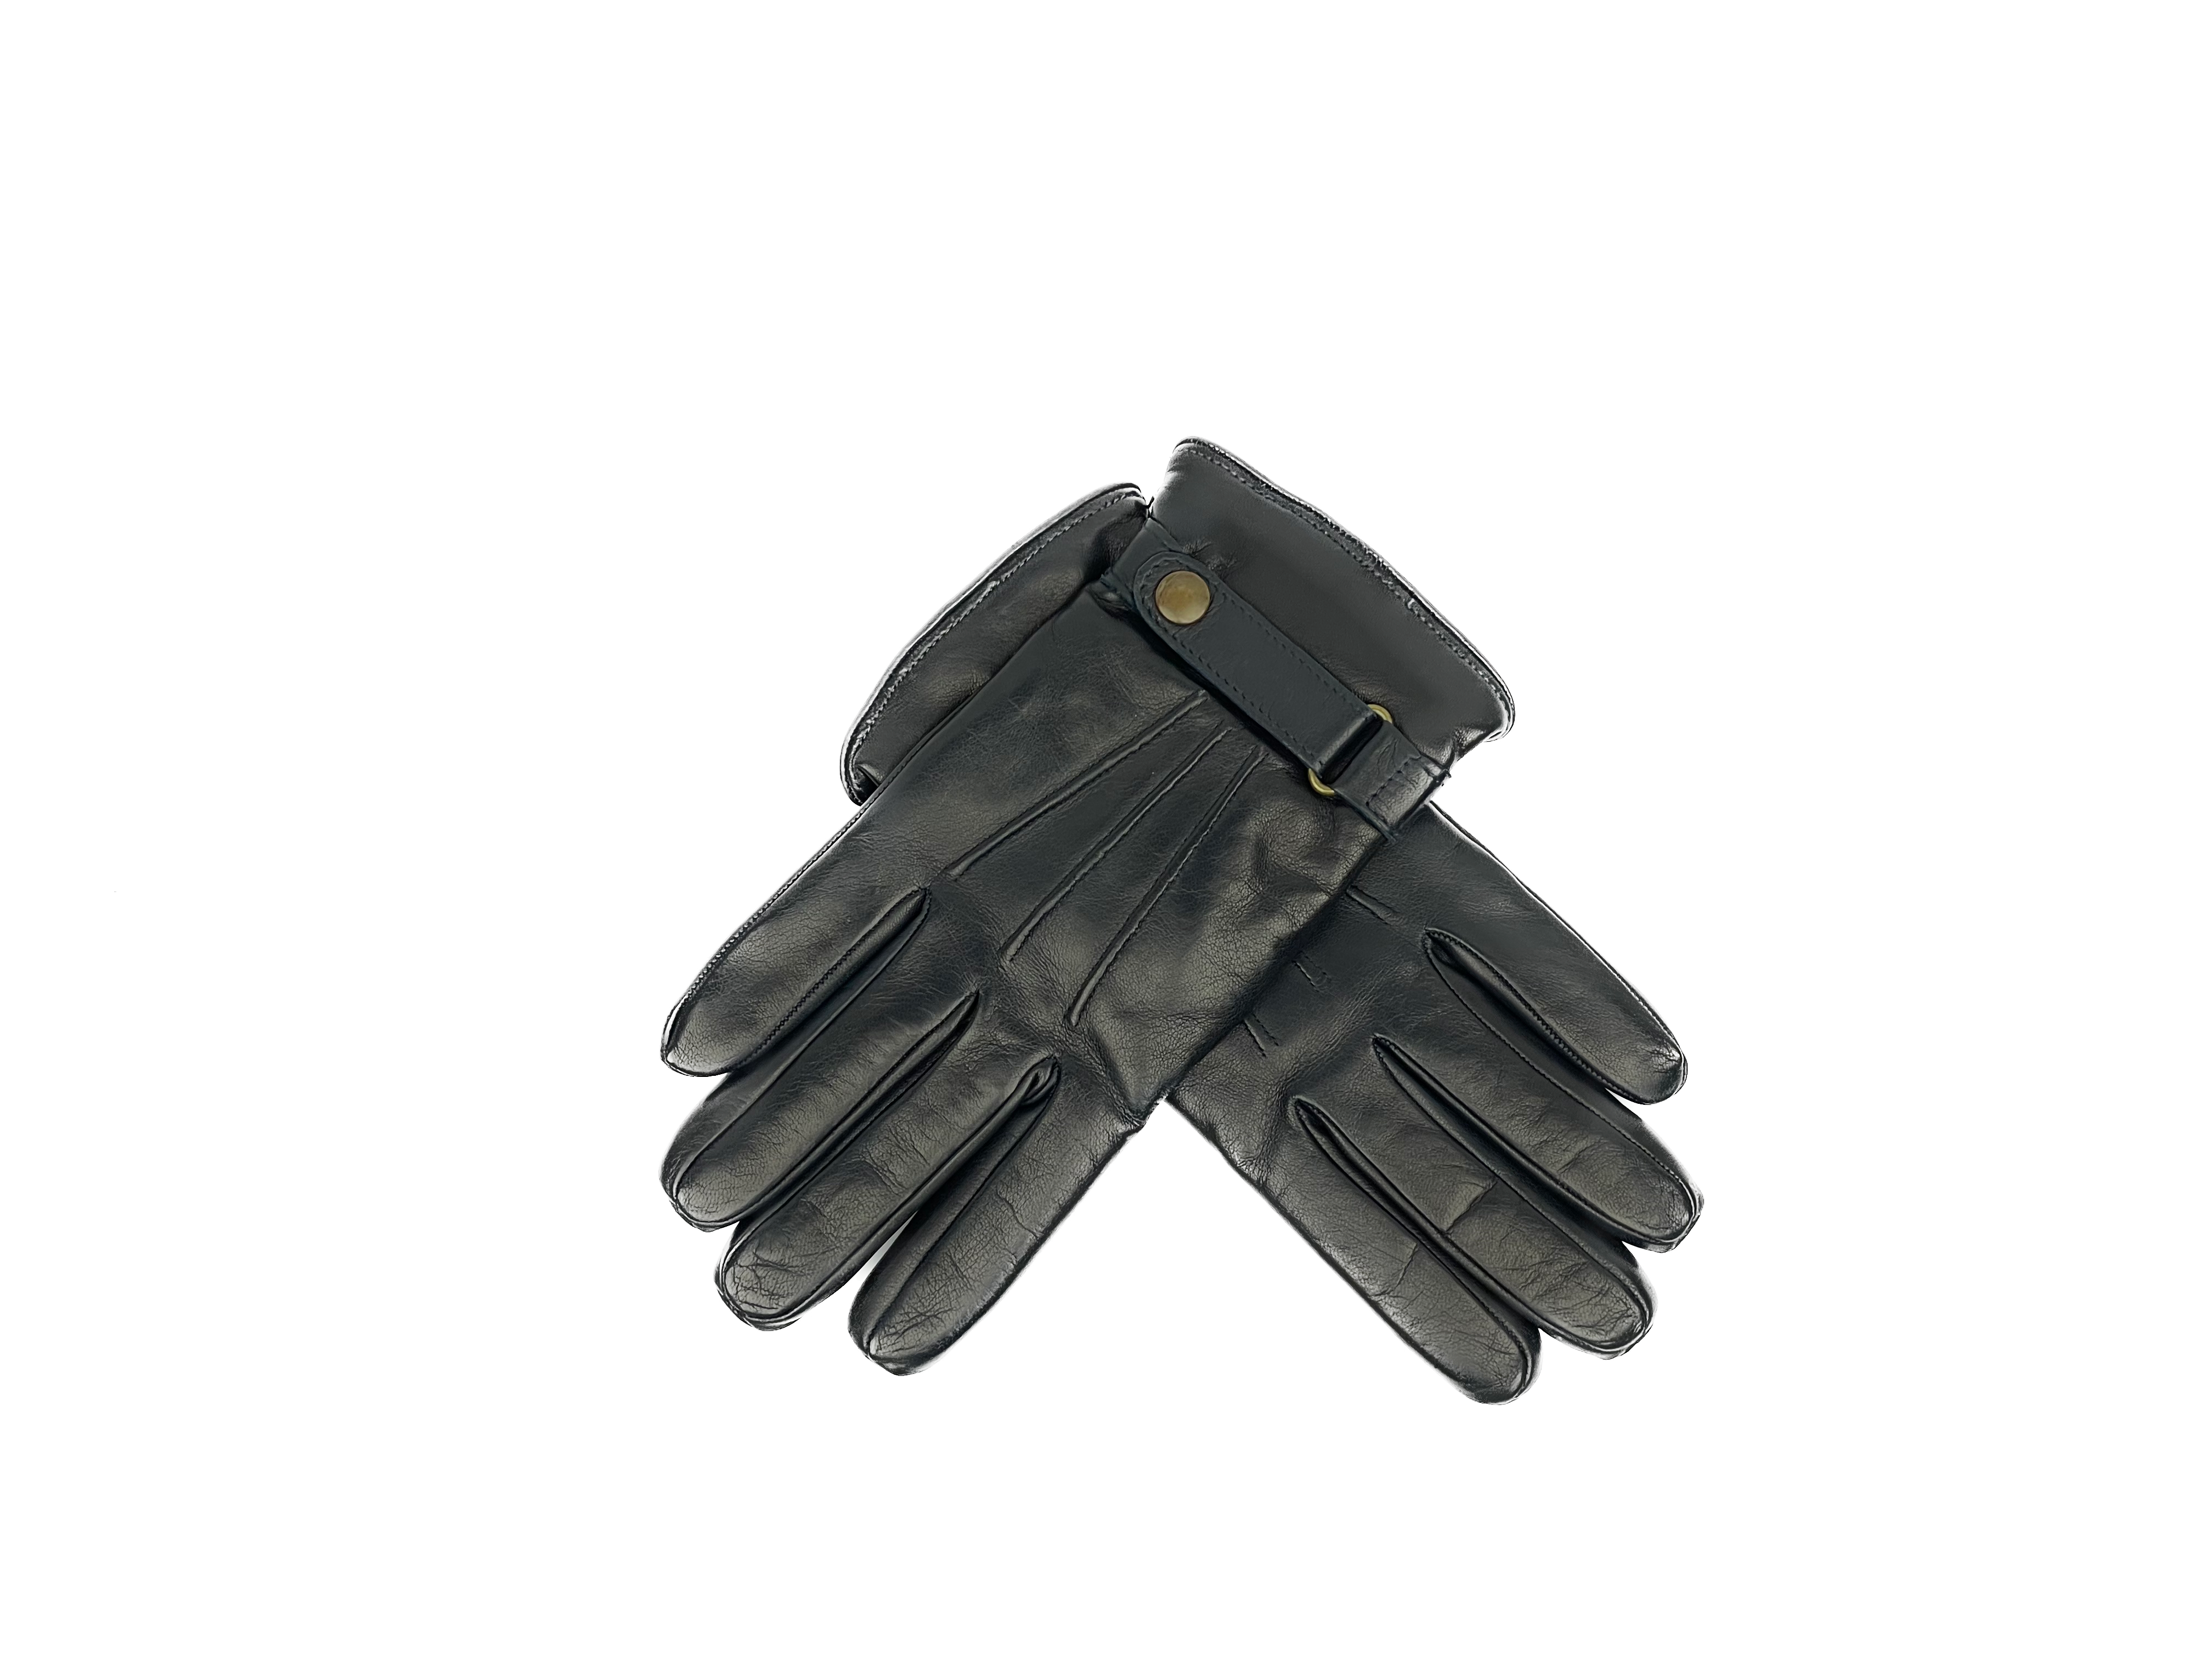 Lambskin gloves with strap